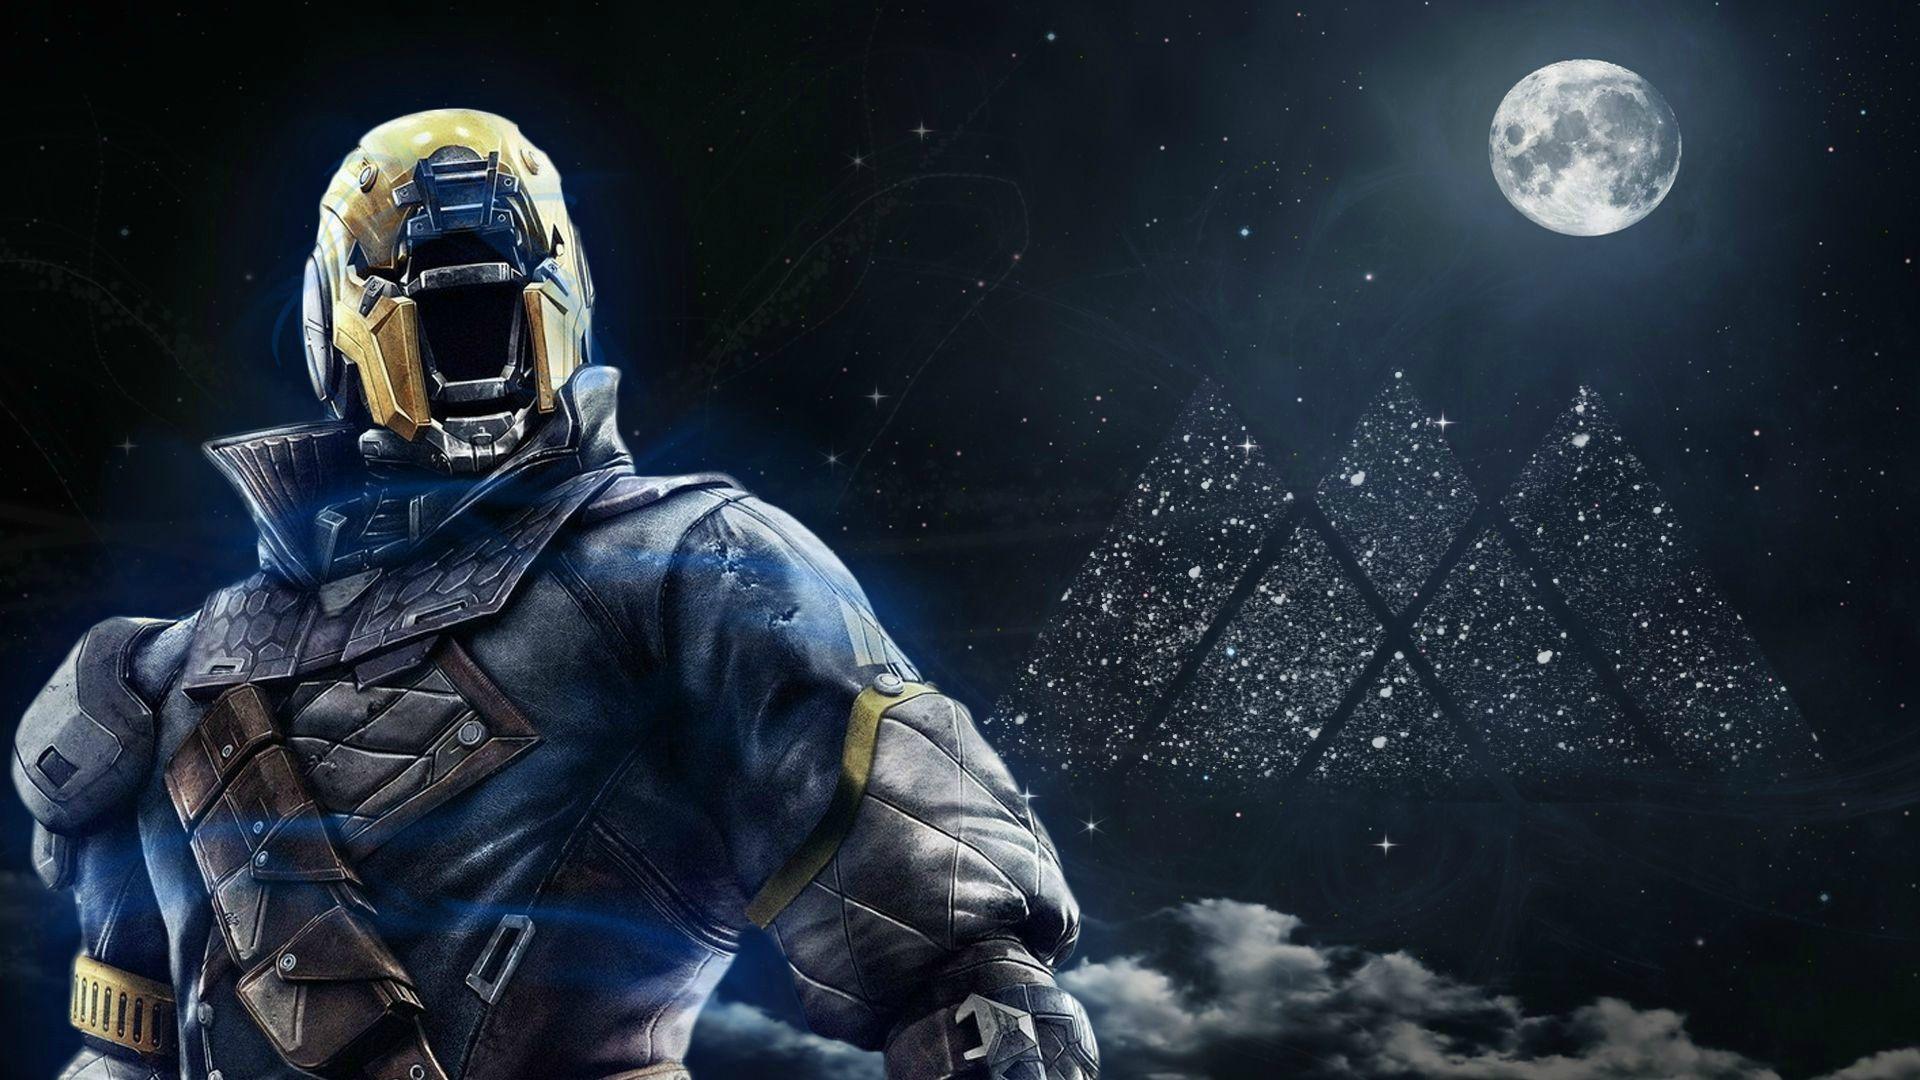 Destiny Full HD Wallpaper and Background Imagex1080